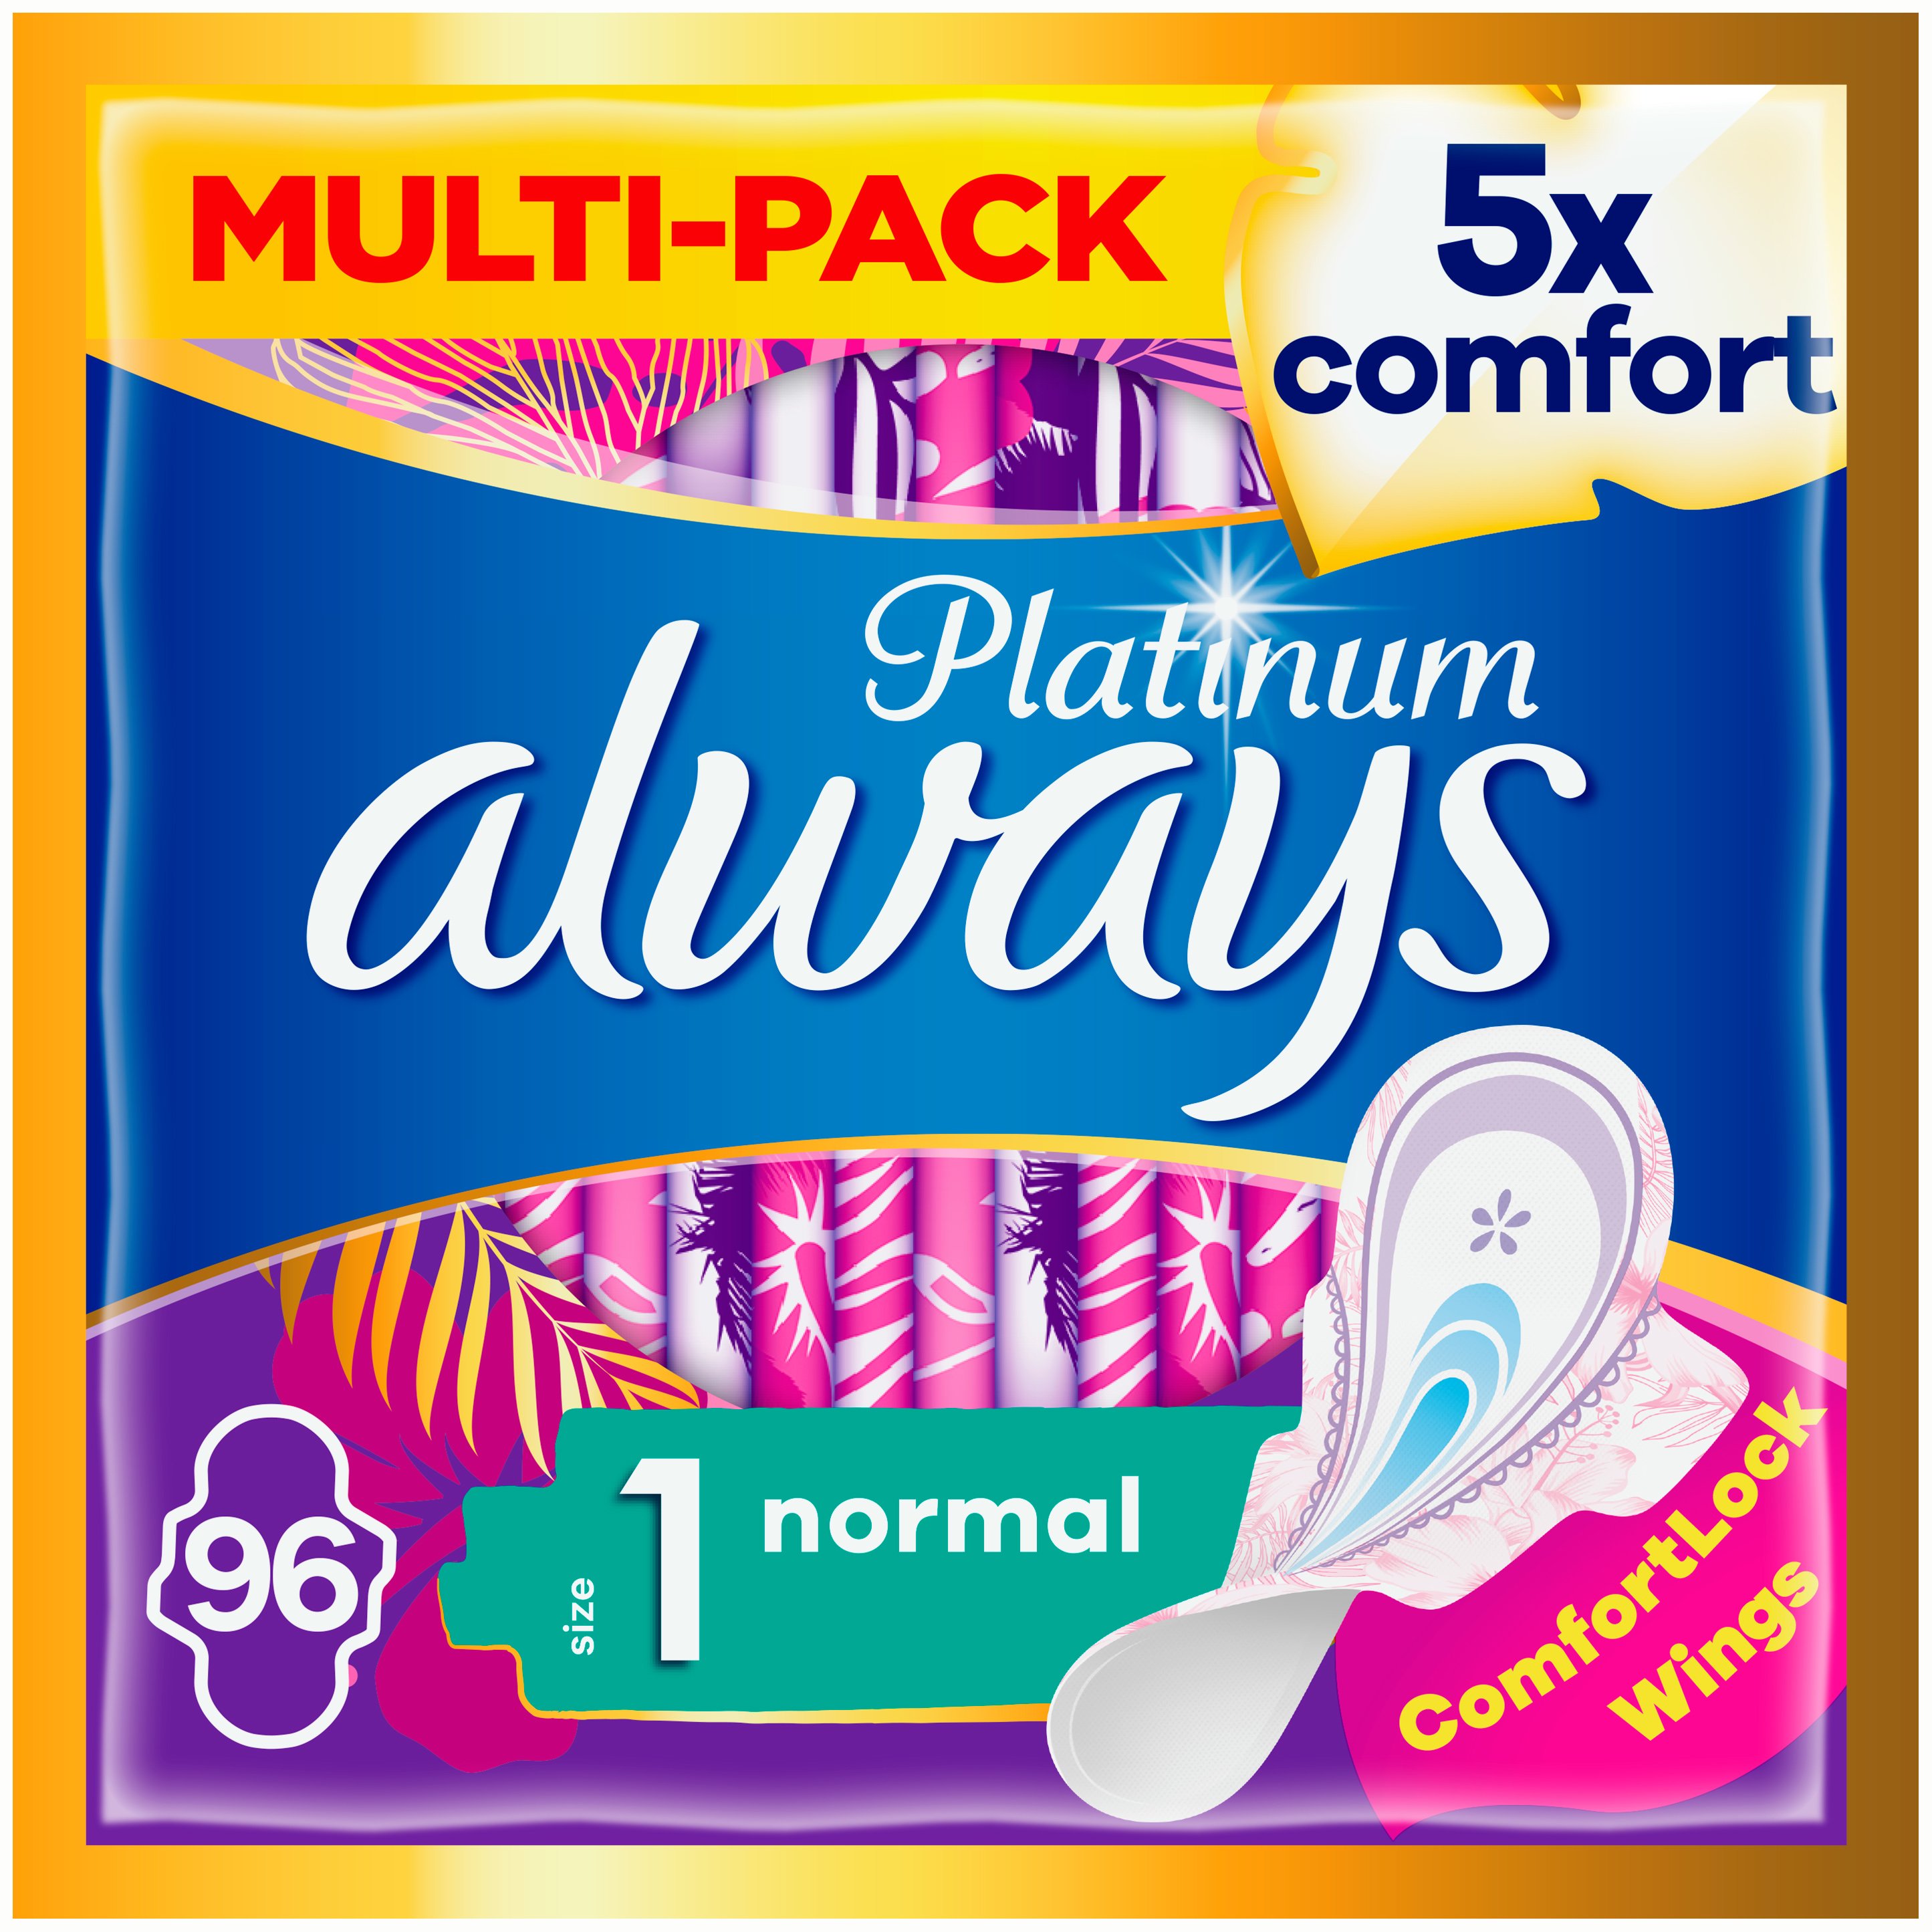 Always Promo Multi-Pack Platinum Normal Sanitary Towels with Wings Σερβιέτες με Φτερά για Πενταπλάσια Άνεση & Προστασία Size 1, 96 Τεμάχια